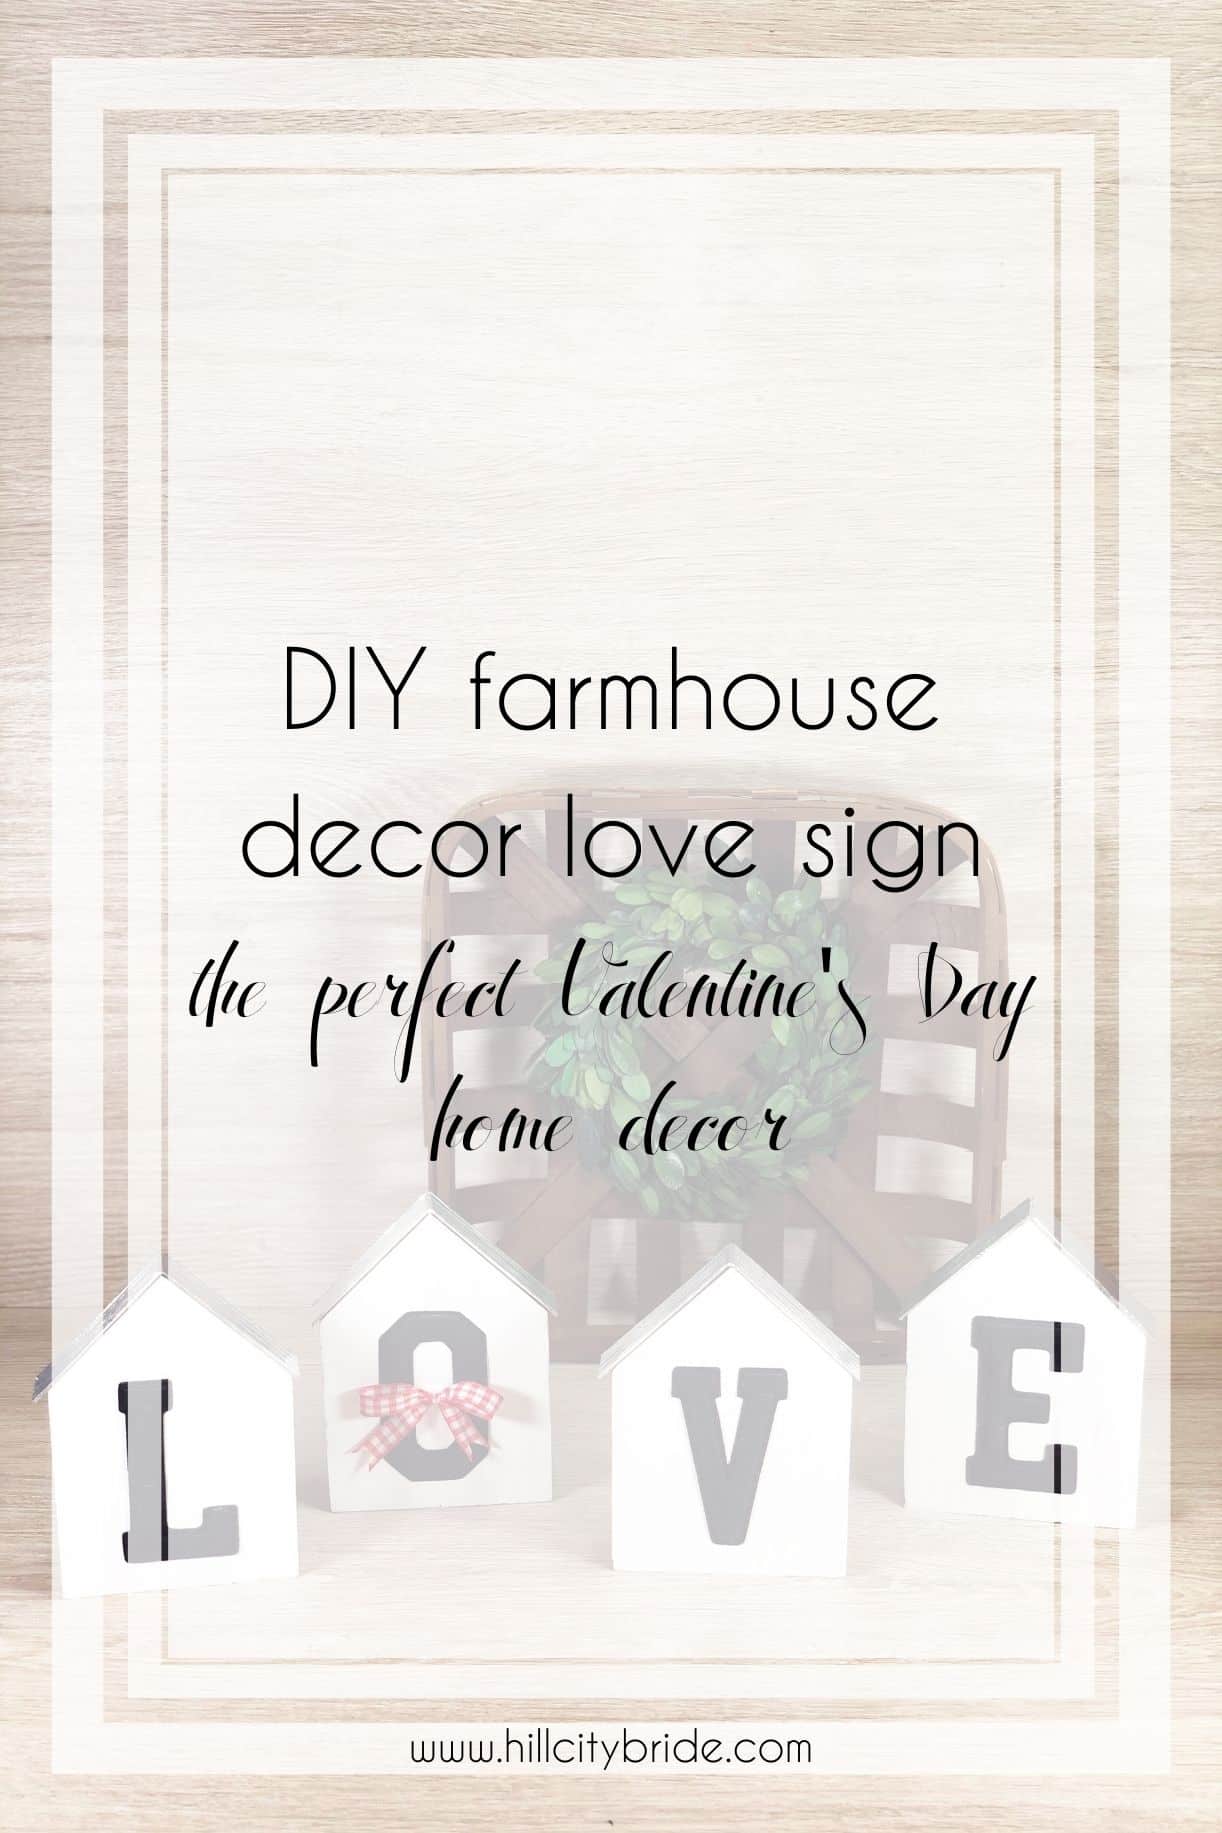 This Adorable Love Sign Is the Most Perfect Valentine Home Decor